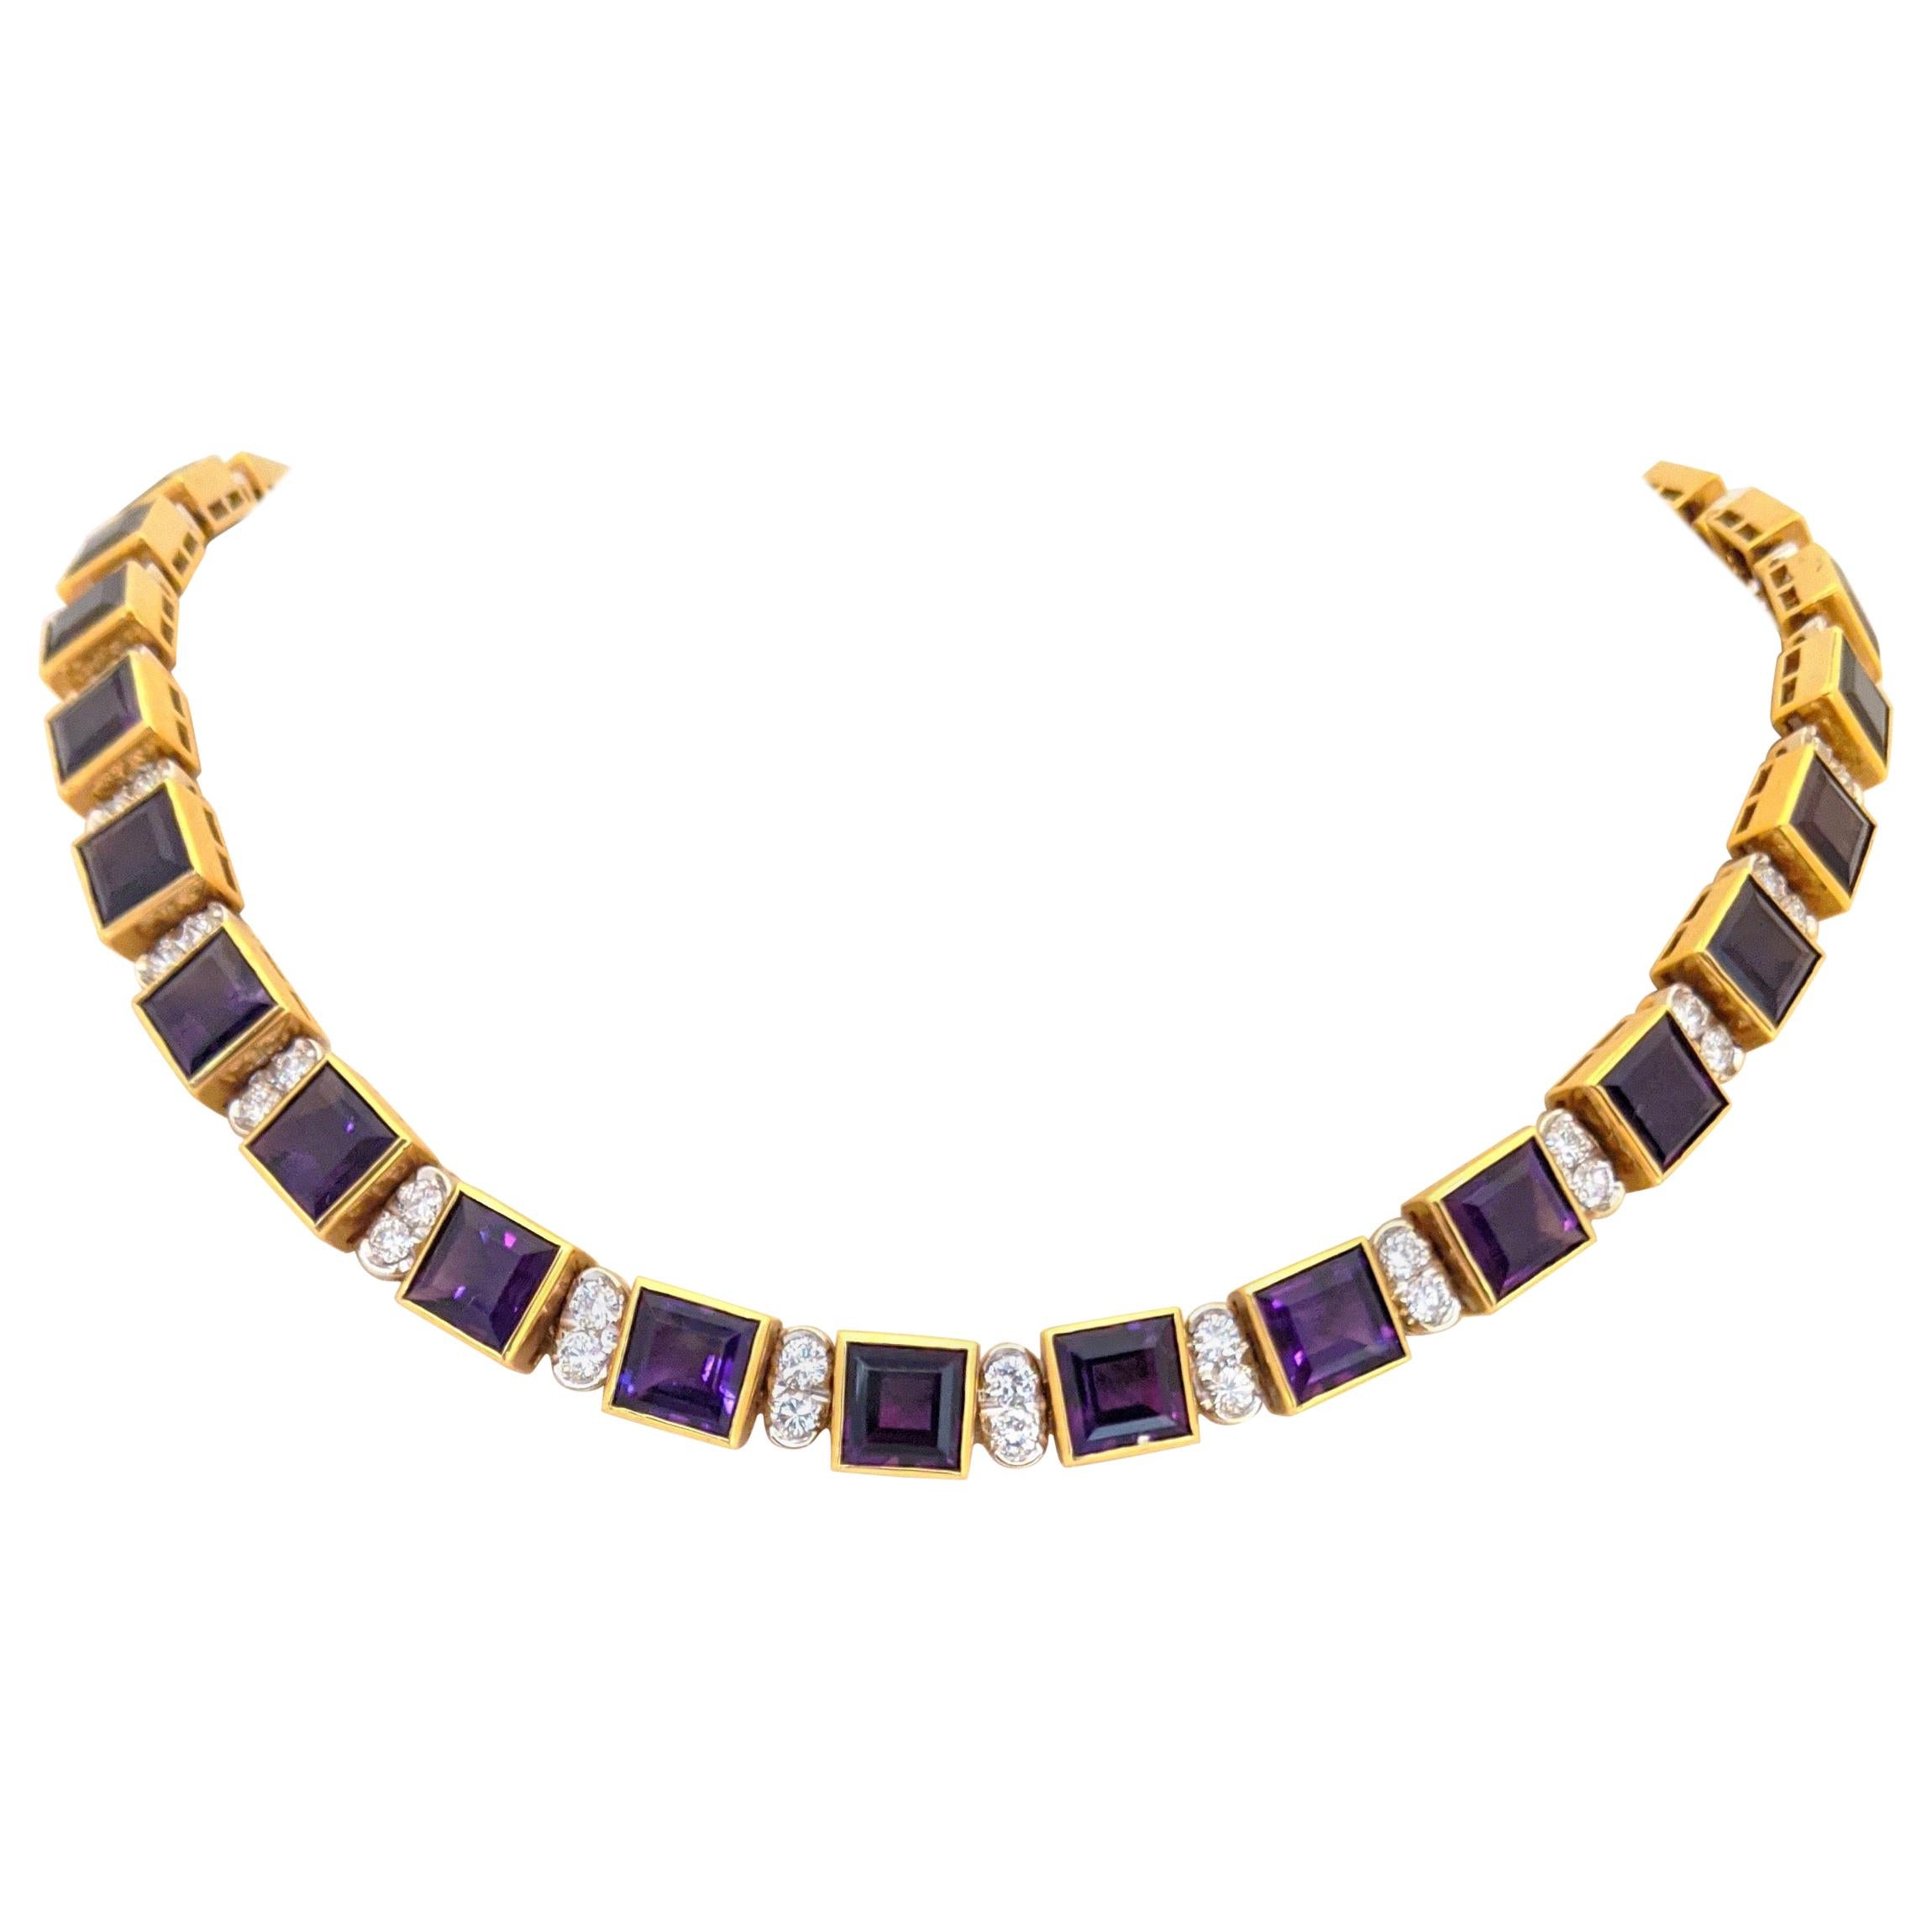 18KT Yellow Gold 61.19CT. Amethyst & 5.51Ct. Diamond Art Deco Inspired Necklace